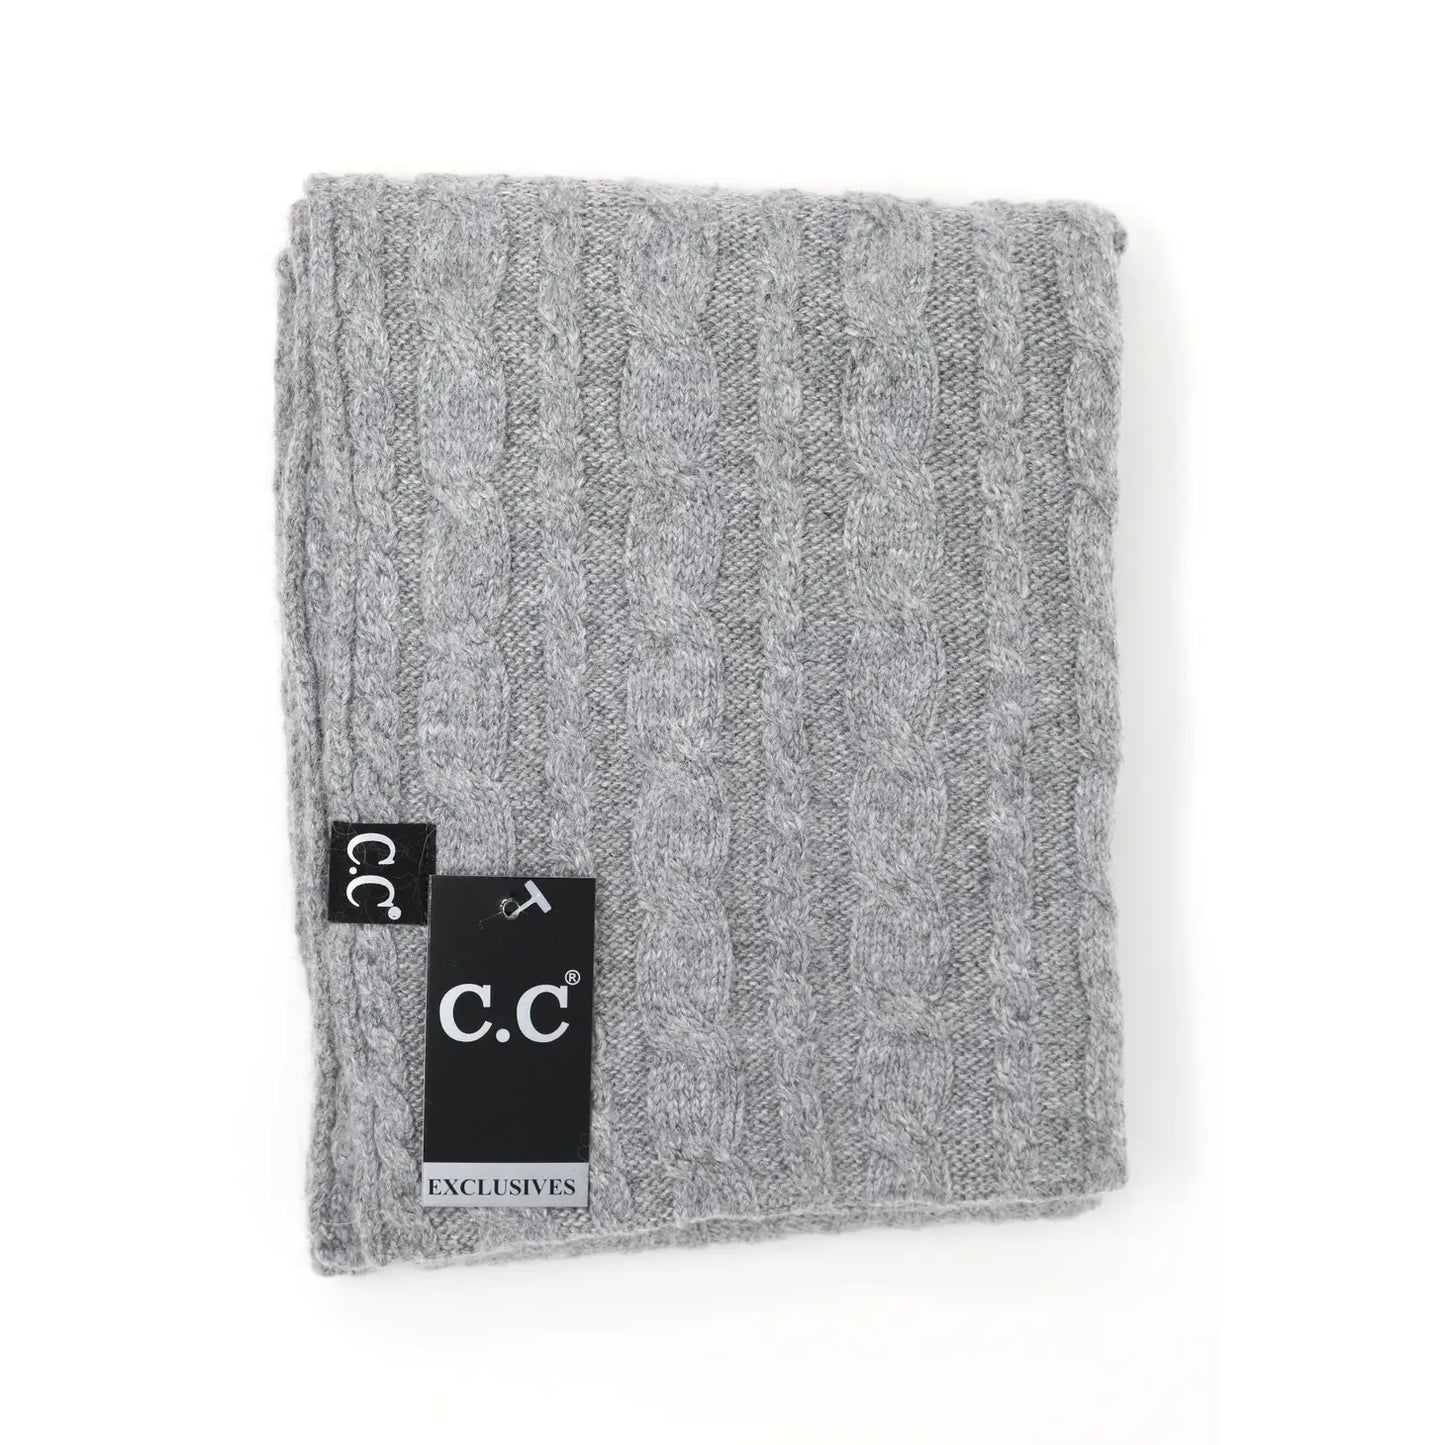 Cc Exclusive-Black Label Cable Knit Cc Infinity Scarf